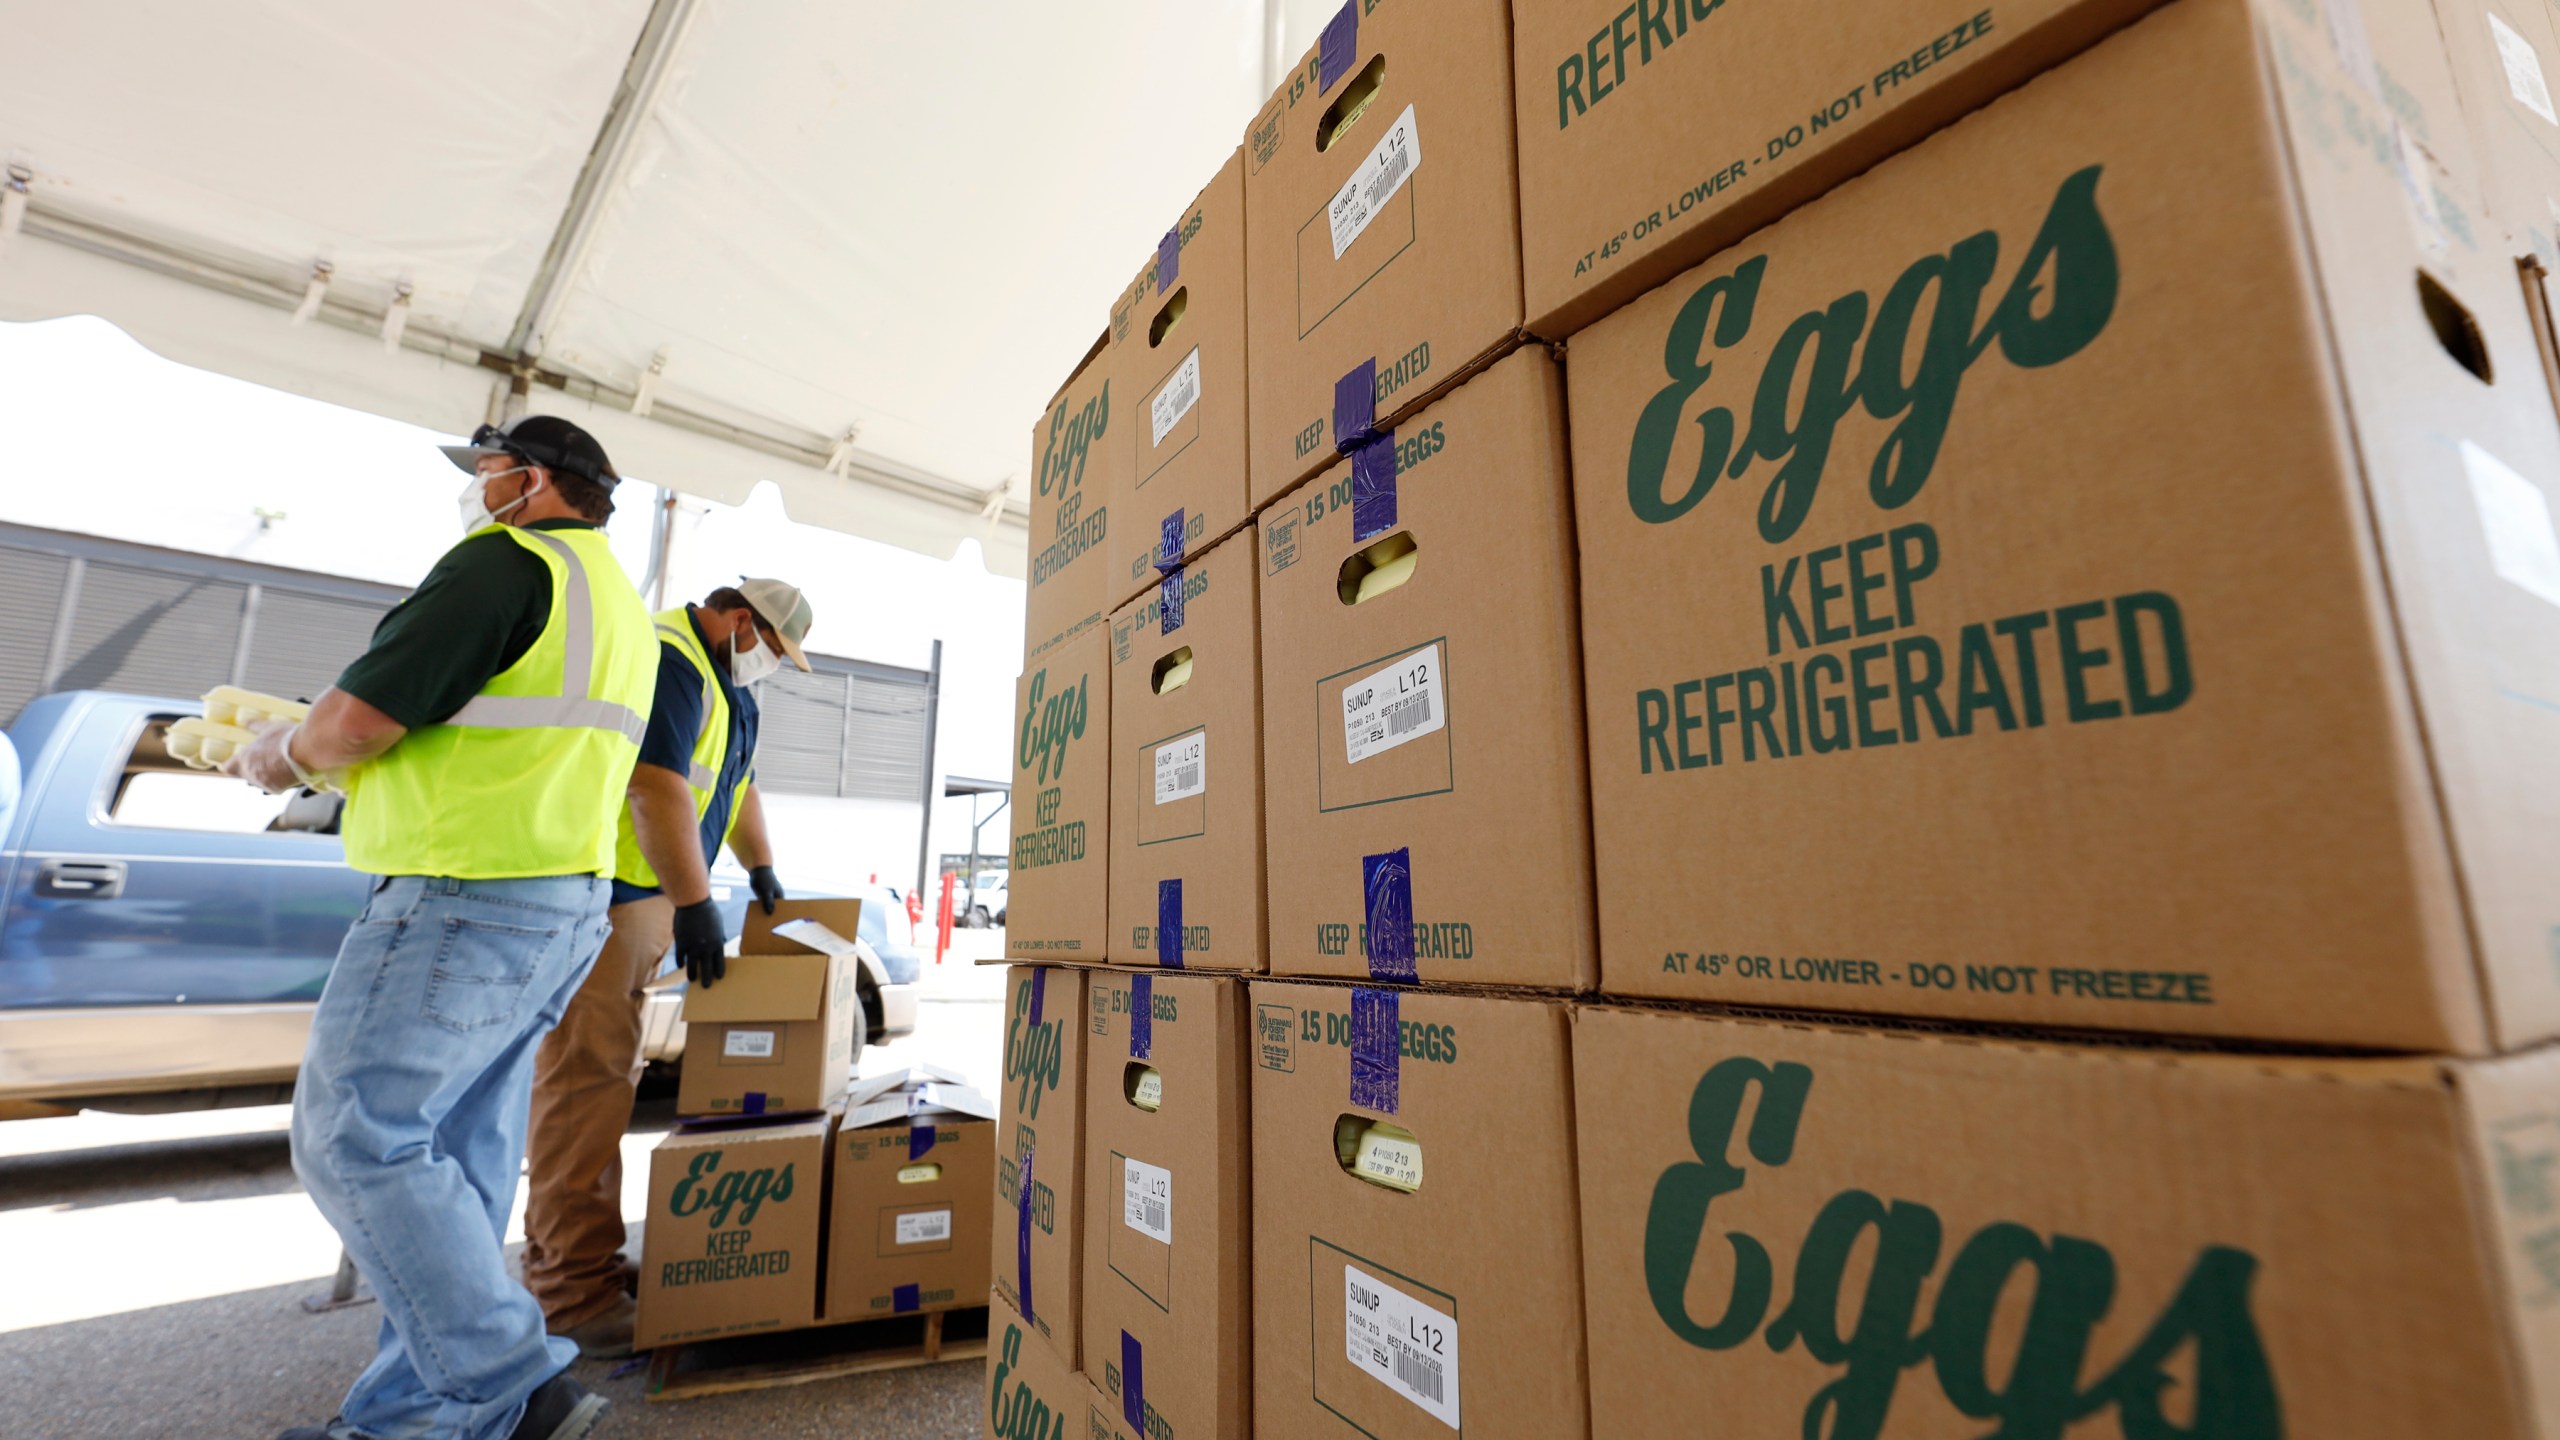 FILE - Cases of eggs from Cal-Maine Foods, Inc., await to be handed out by the Mississippi Department of Agriculture and Commerce employees at the Mississippi State Fairgrounds in Jackson, Miss., on Aug. 7, 2020. The largest producer of fresh eggs in the United States said Tuesday, April 2, 2024 that it has stopped production at a Texas plant after bird flu was found in chickens there. Cal-Maine Foods, Inc. said in a statement that approximately 1.6 million laying hens and 337,000 pullets, about 3.6% of its total flock, were destroyed after the infection, avian influenza, was found at the facility in Parmer County, Texas. (AP Photo/Rogelio V. Solis, file)